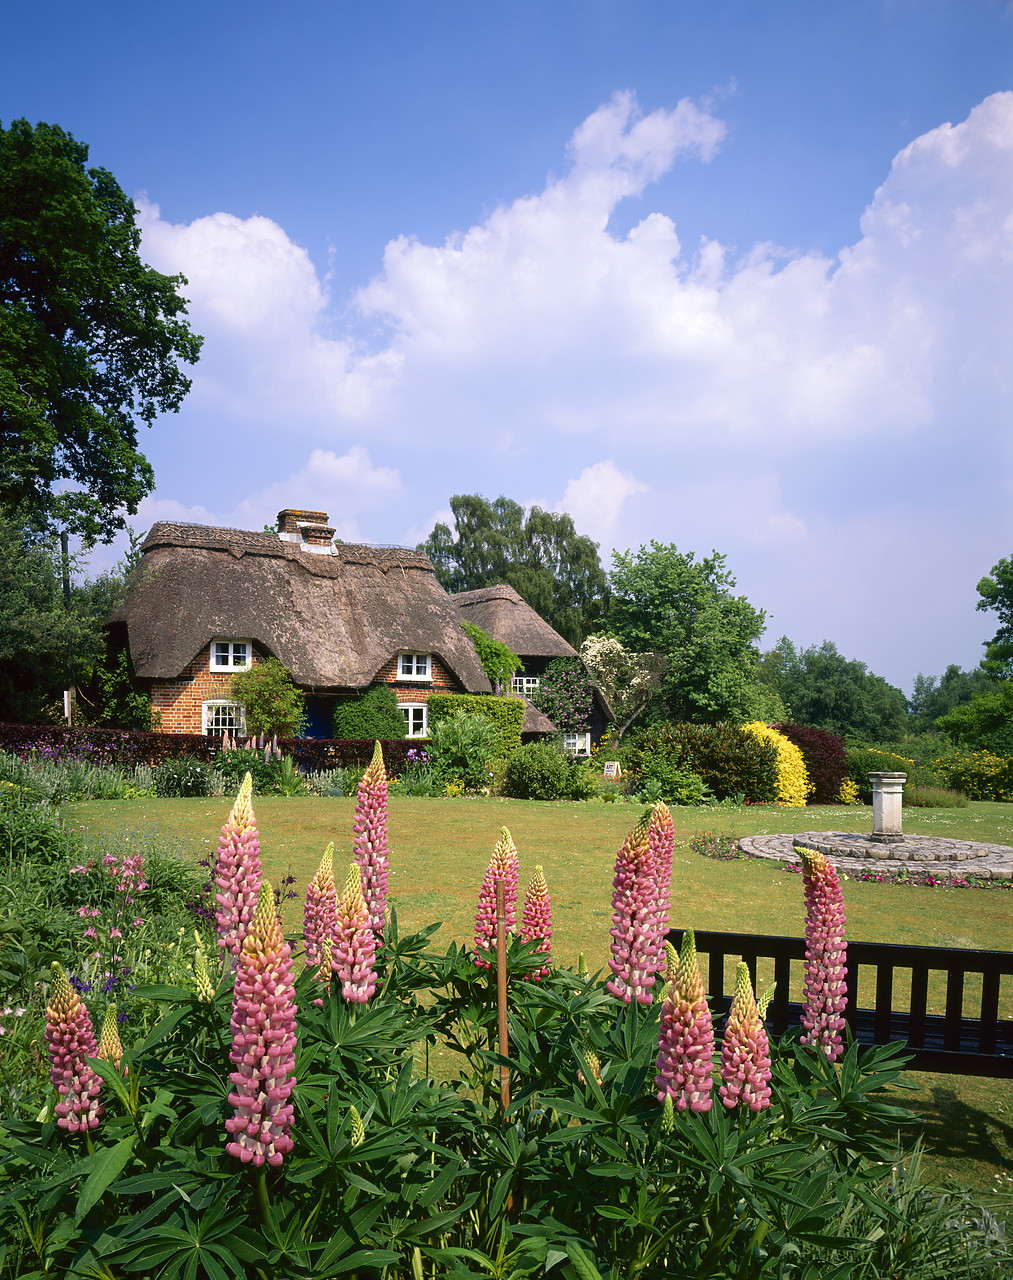 #980695-6 - Thatched Cottage & Lupins, Minstead, Hampshire, England